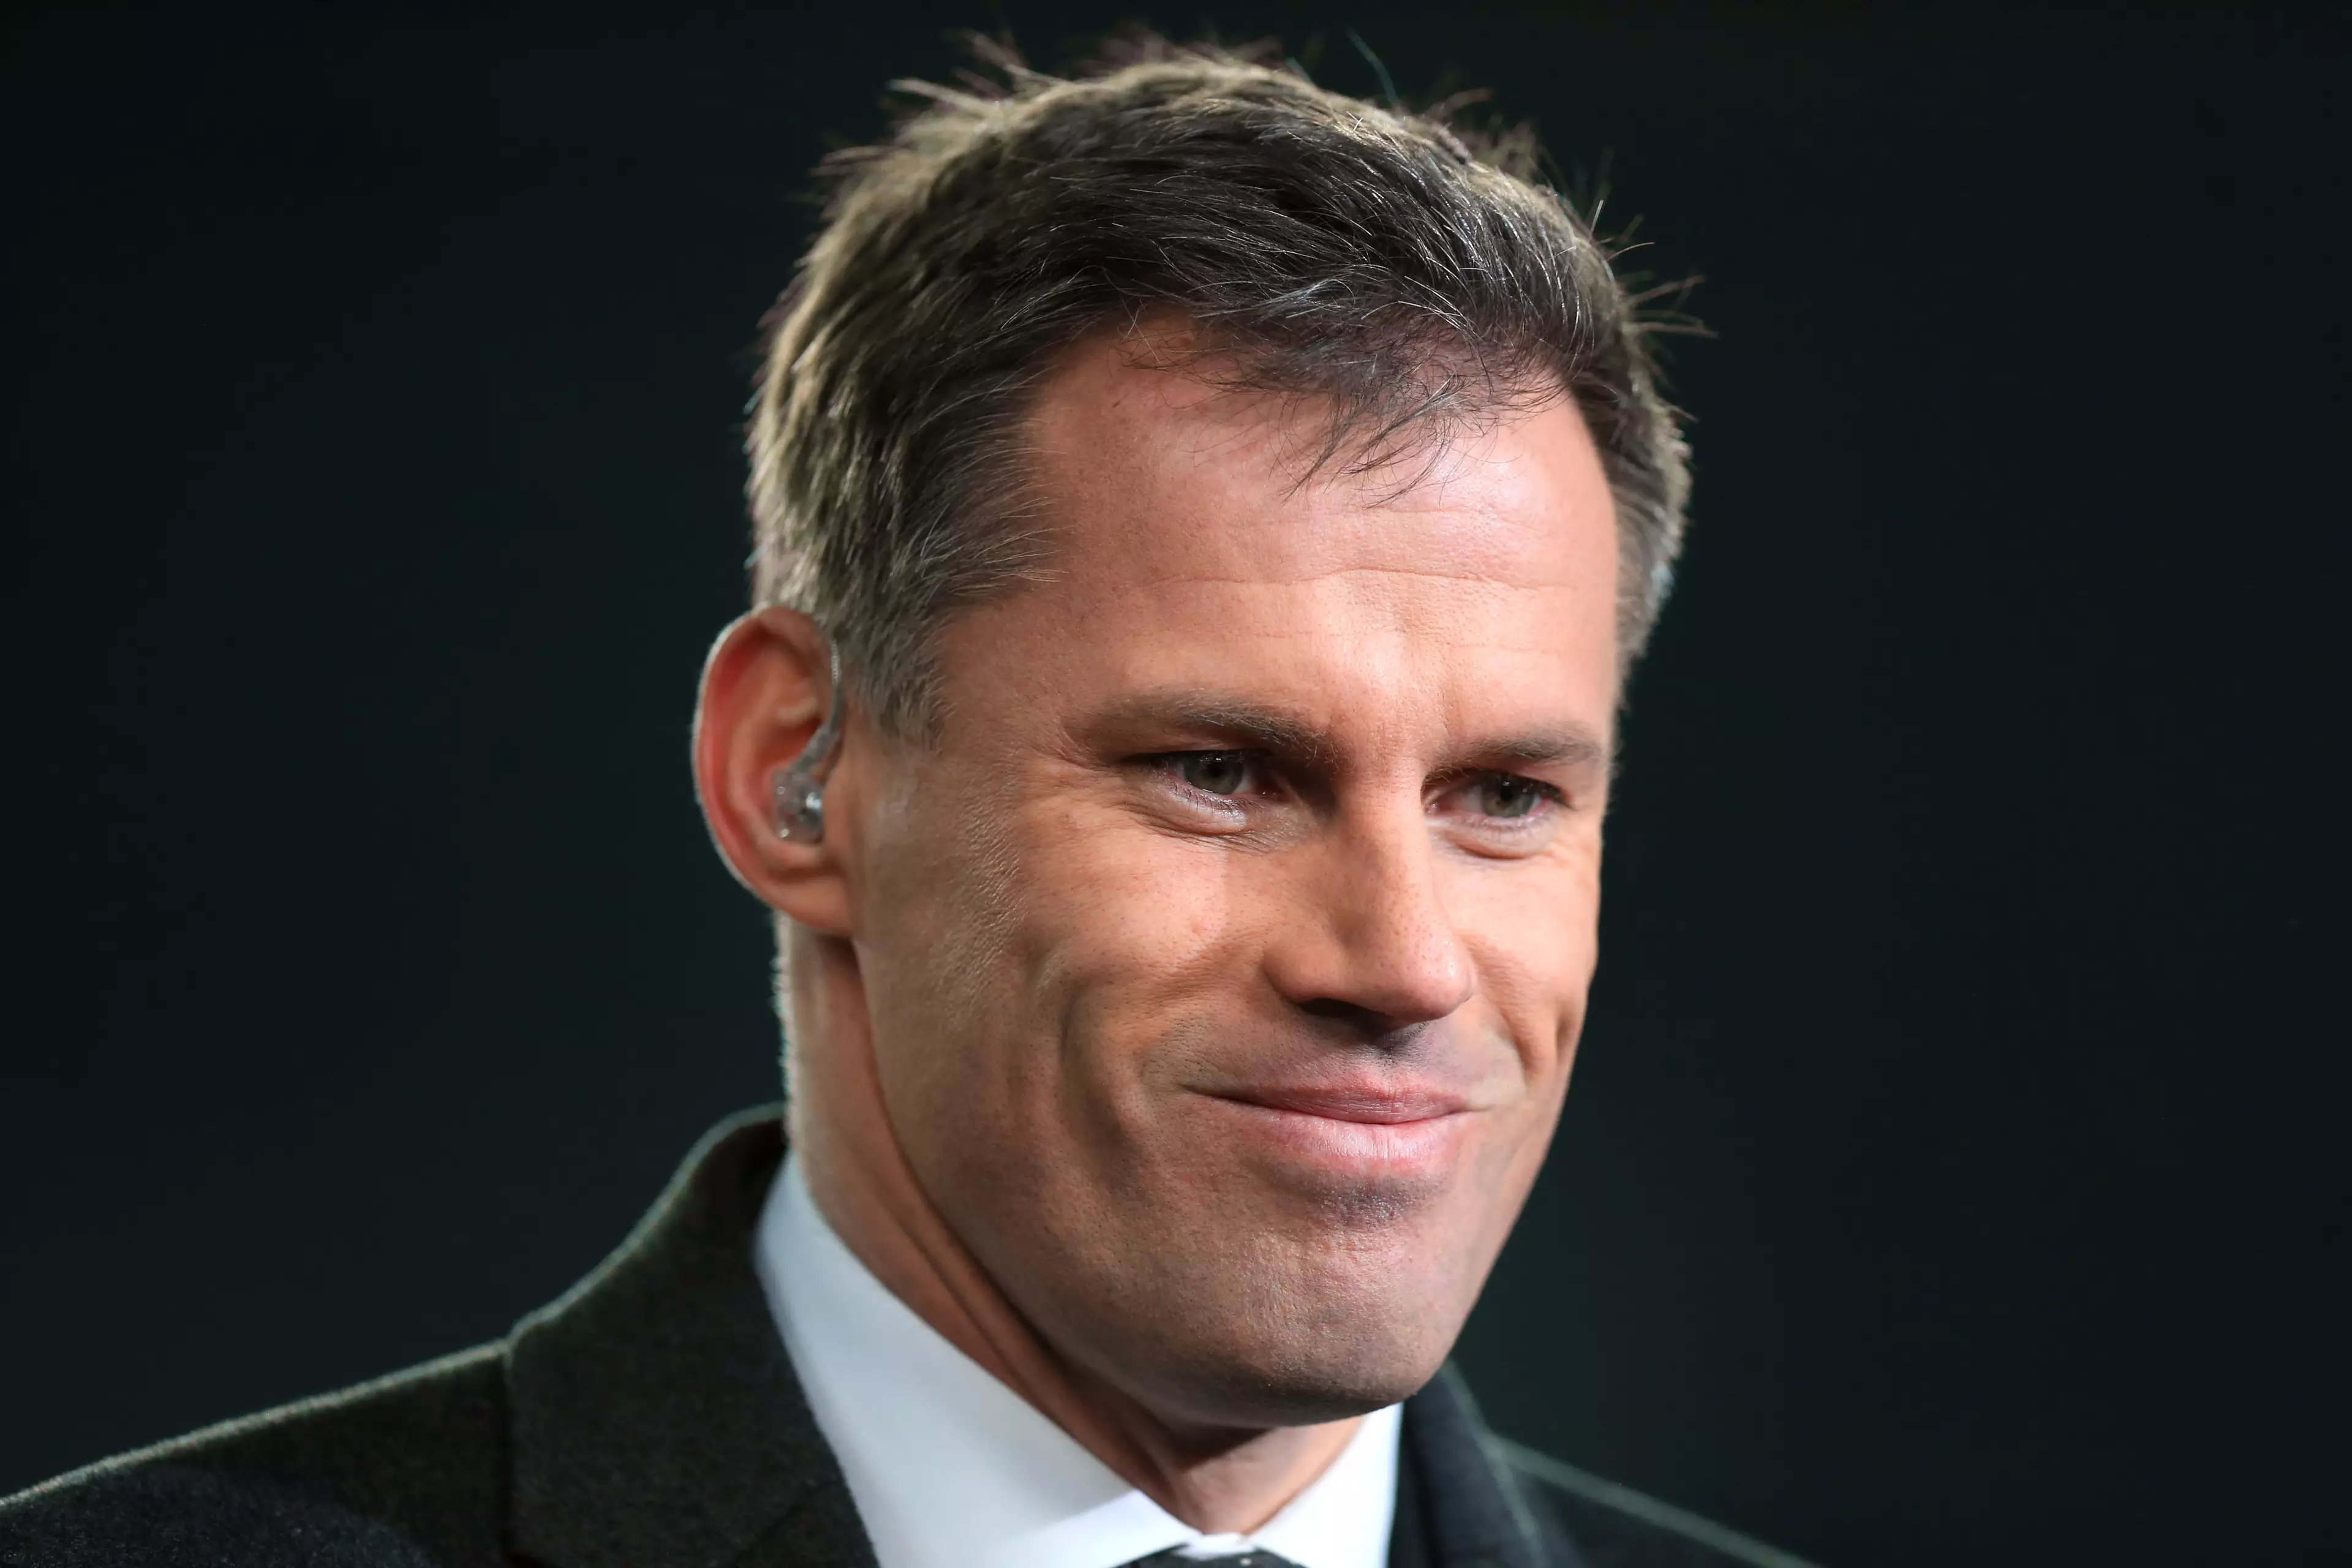 Jamie Carragher Reacts To News Of Jose Mourinho Getting Manchester United Job